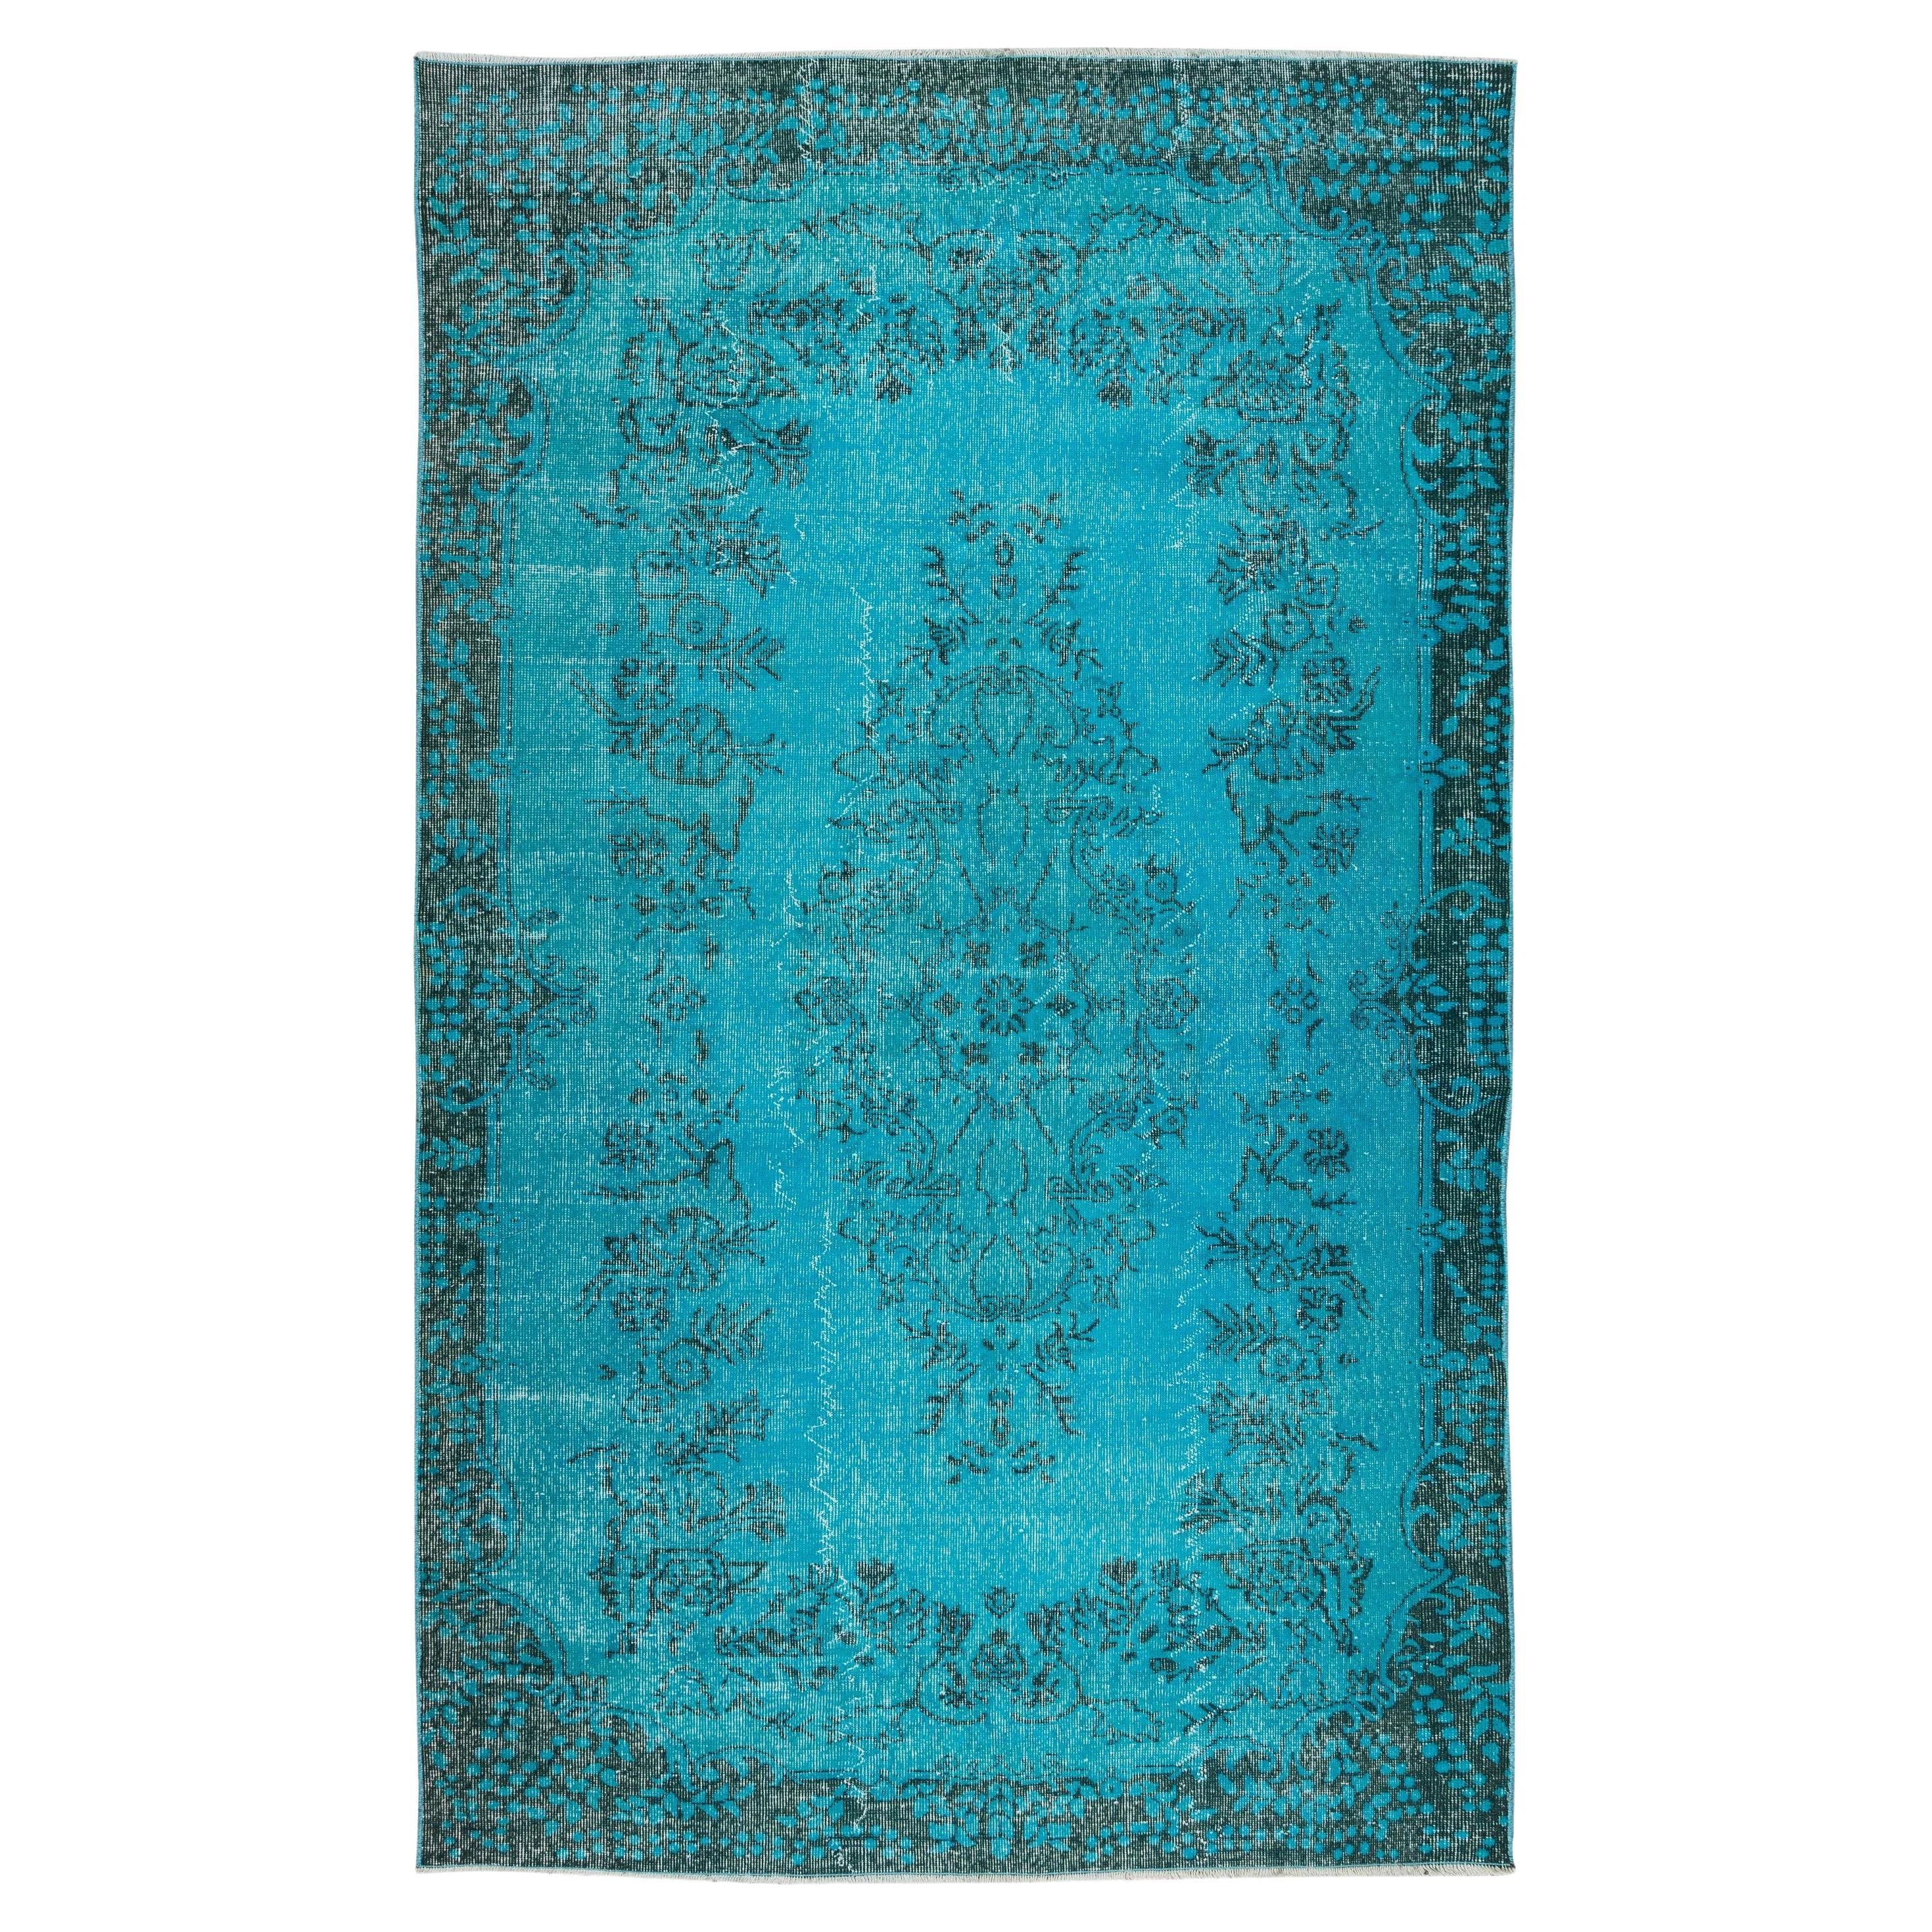 6x9.8 Ft Vintage Handmade Turkish Rug Over-Dyed in Teal Blue 4 Modern Interiors For Sale